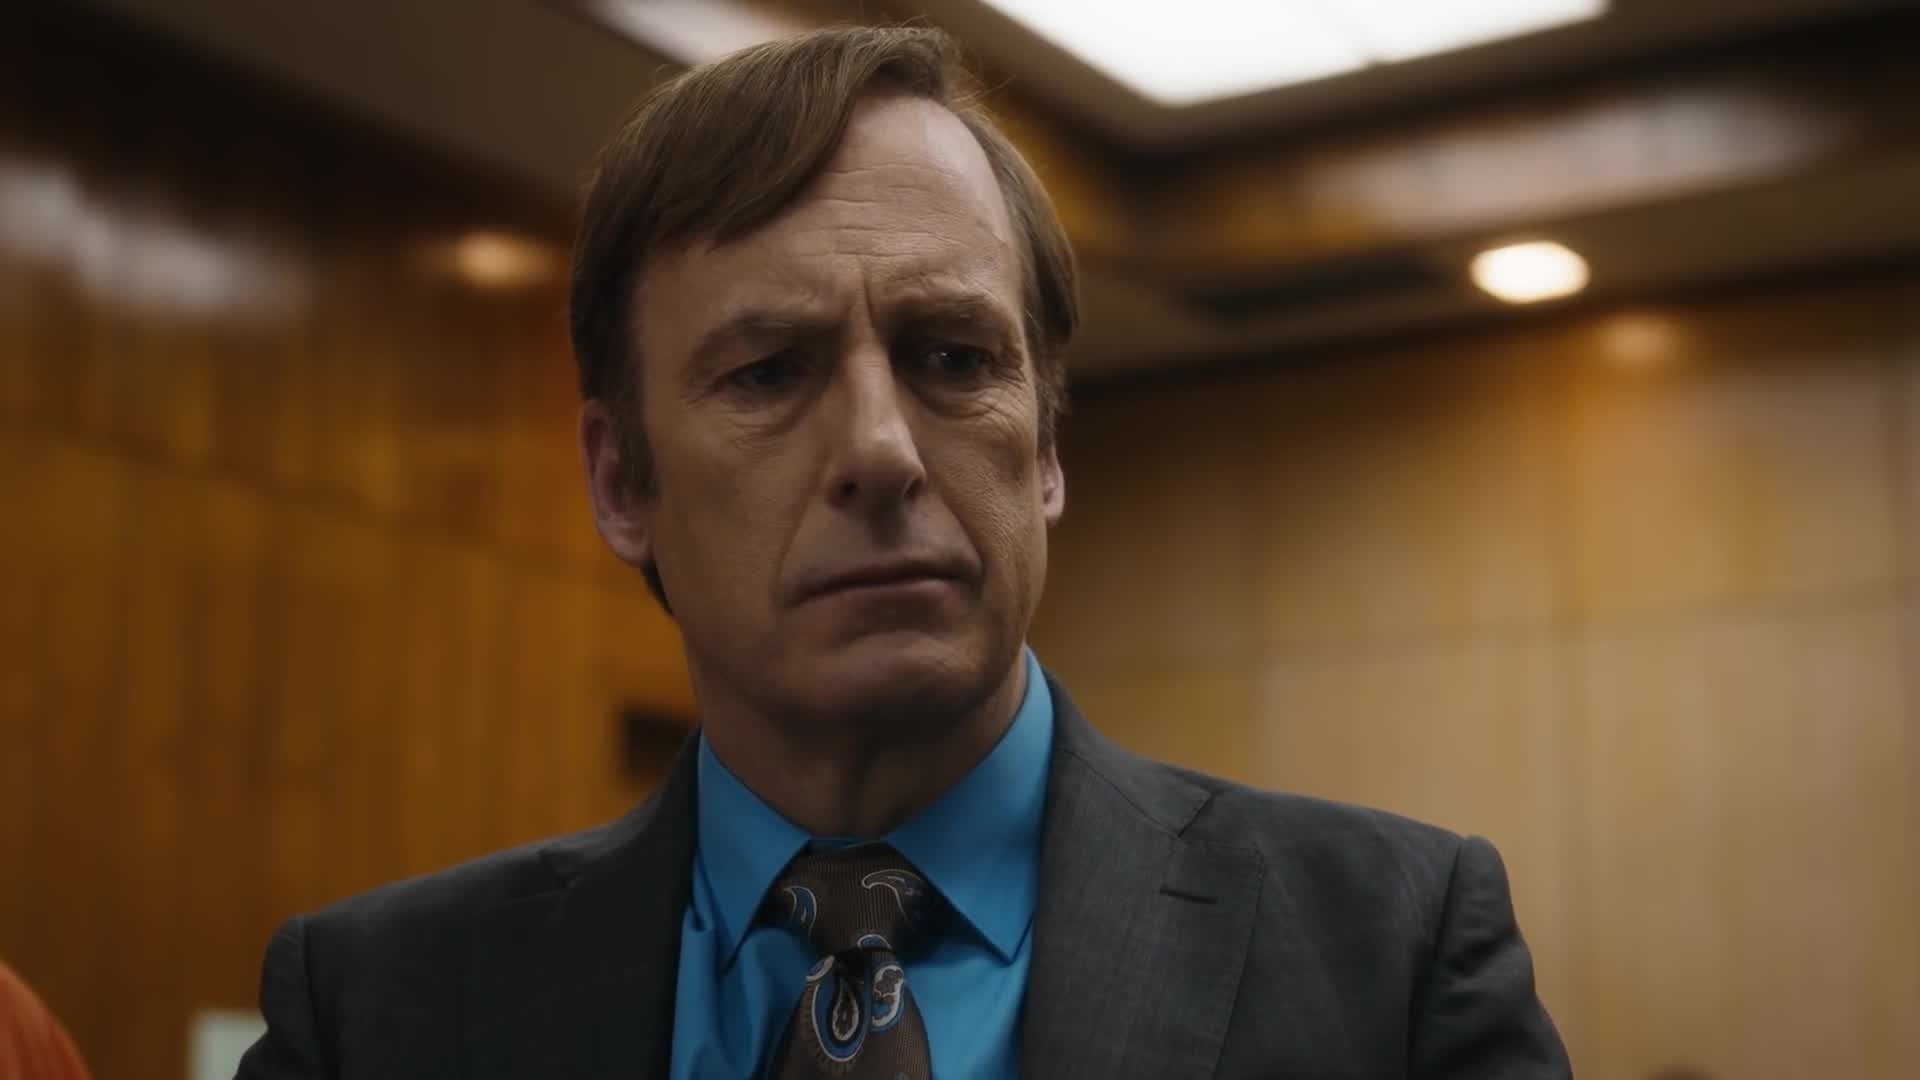 Bob Odenkirk as Saul Goodman looking concerned in a courtroom in &quot;Better Call Saul&quot;